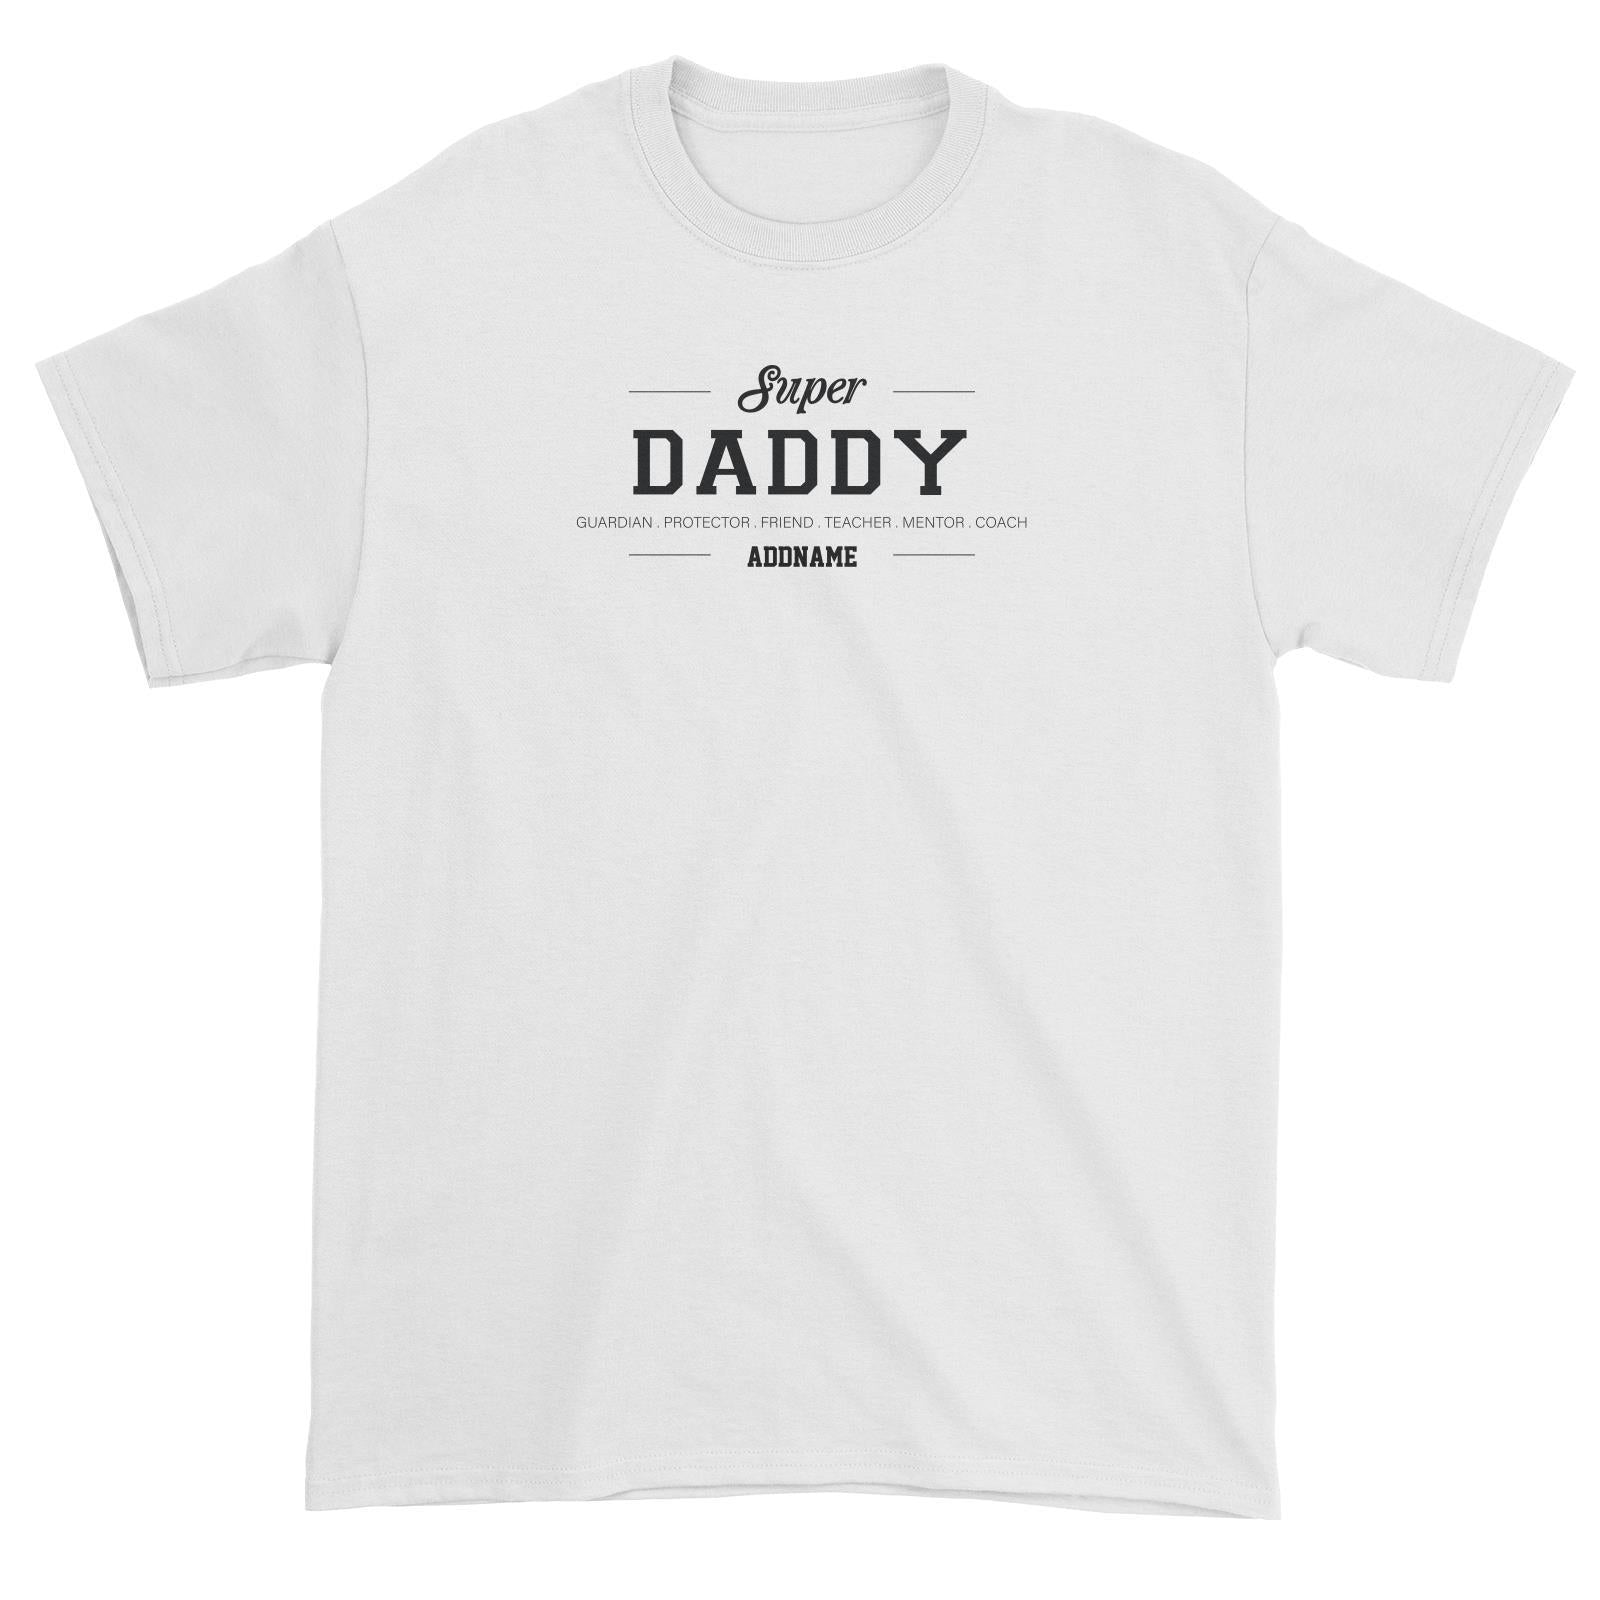 Super Definition Family Super Daddy Addname Unisex T-Shirt